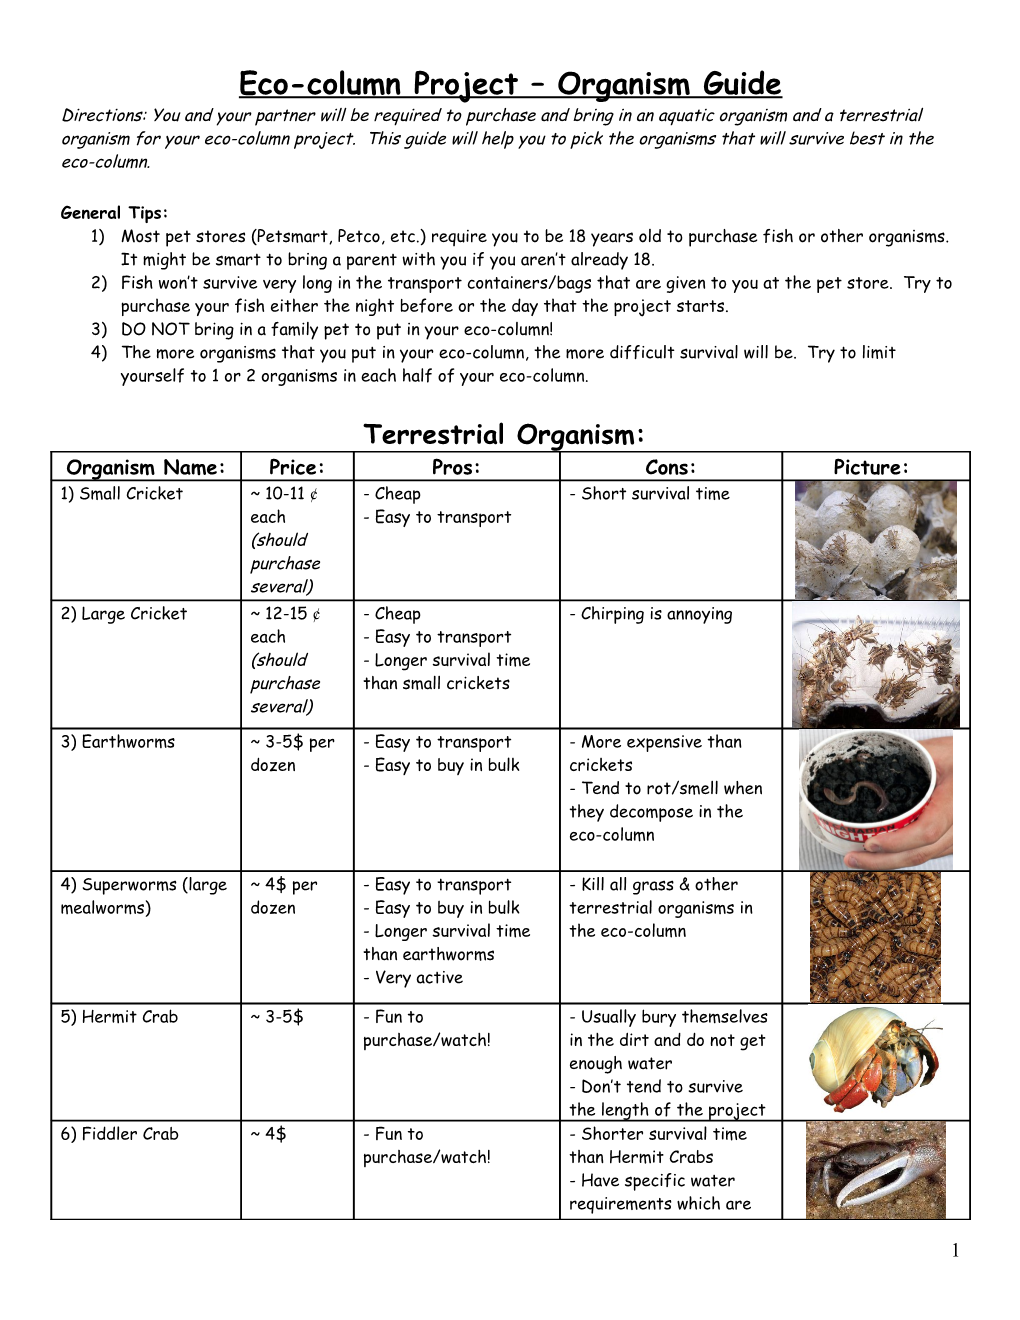 Eco-Column Project Organism Guide